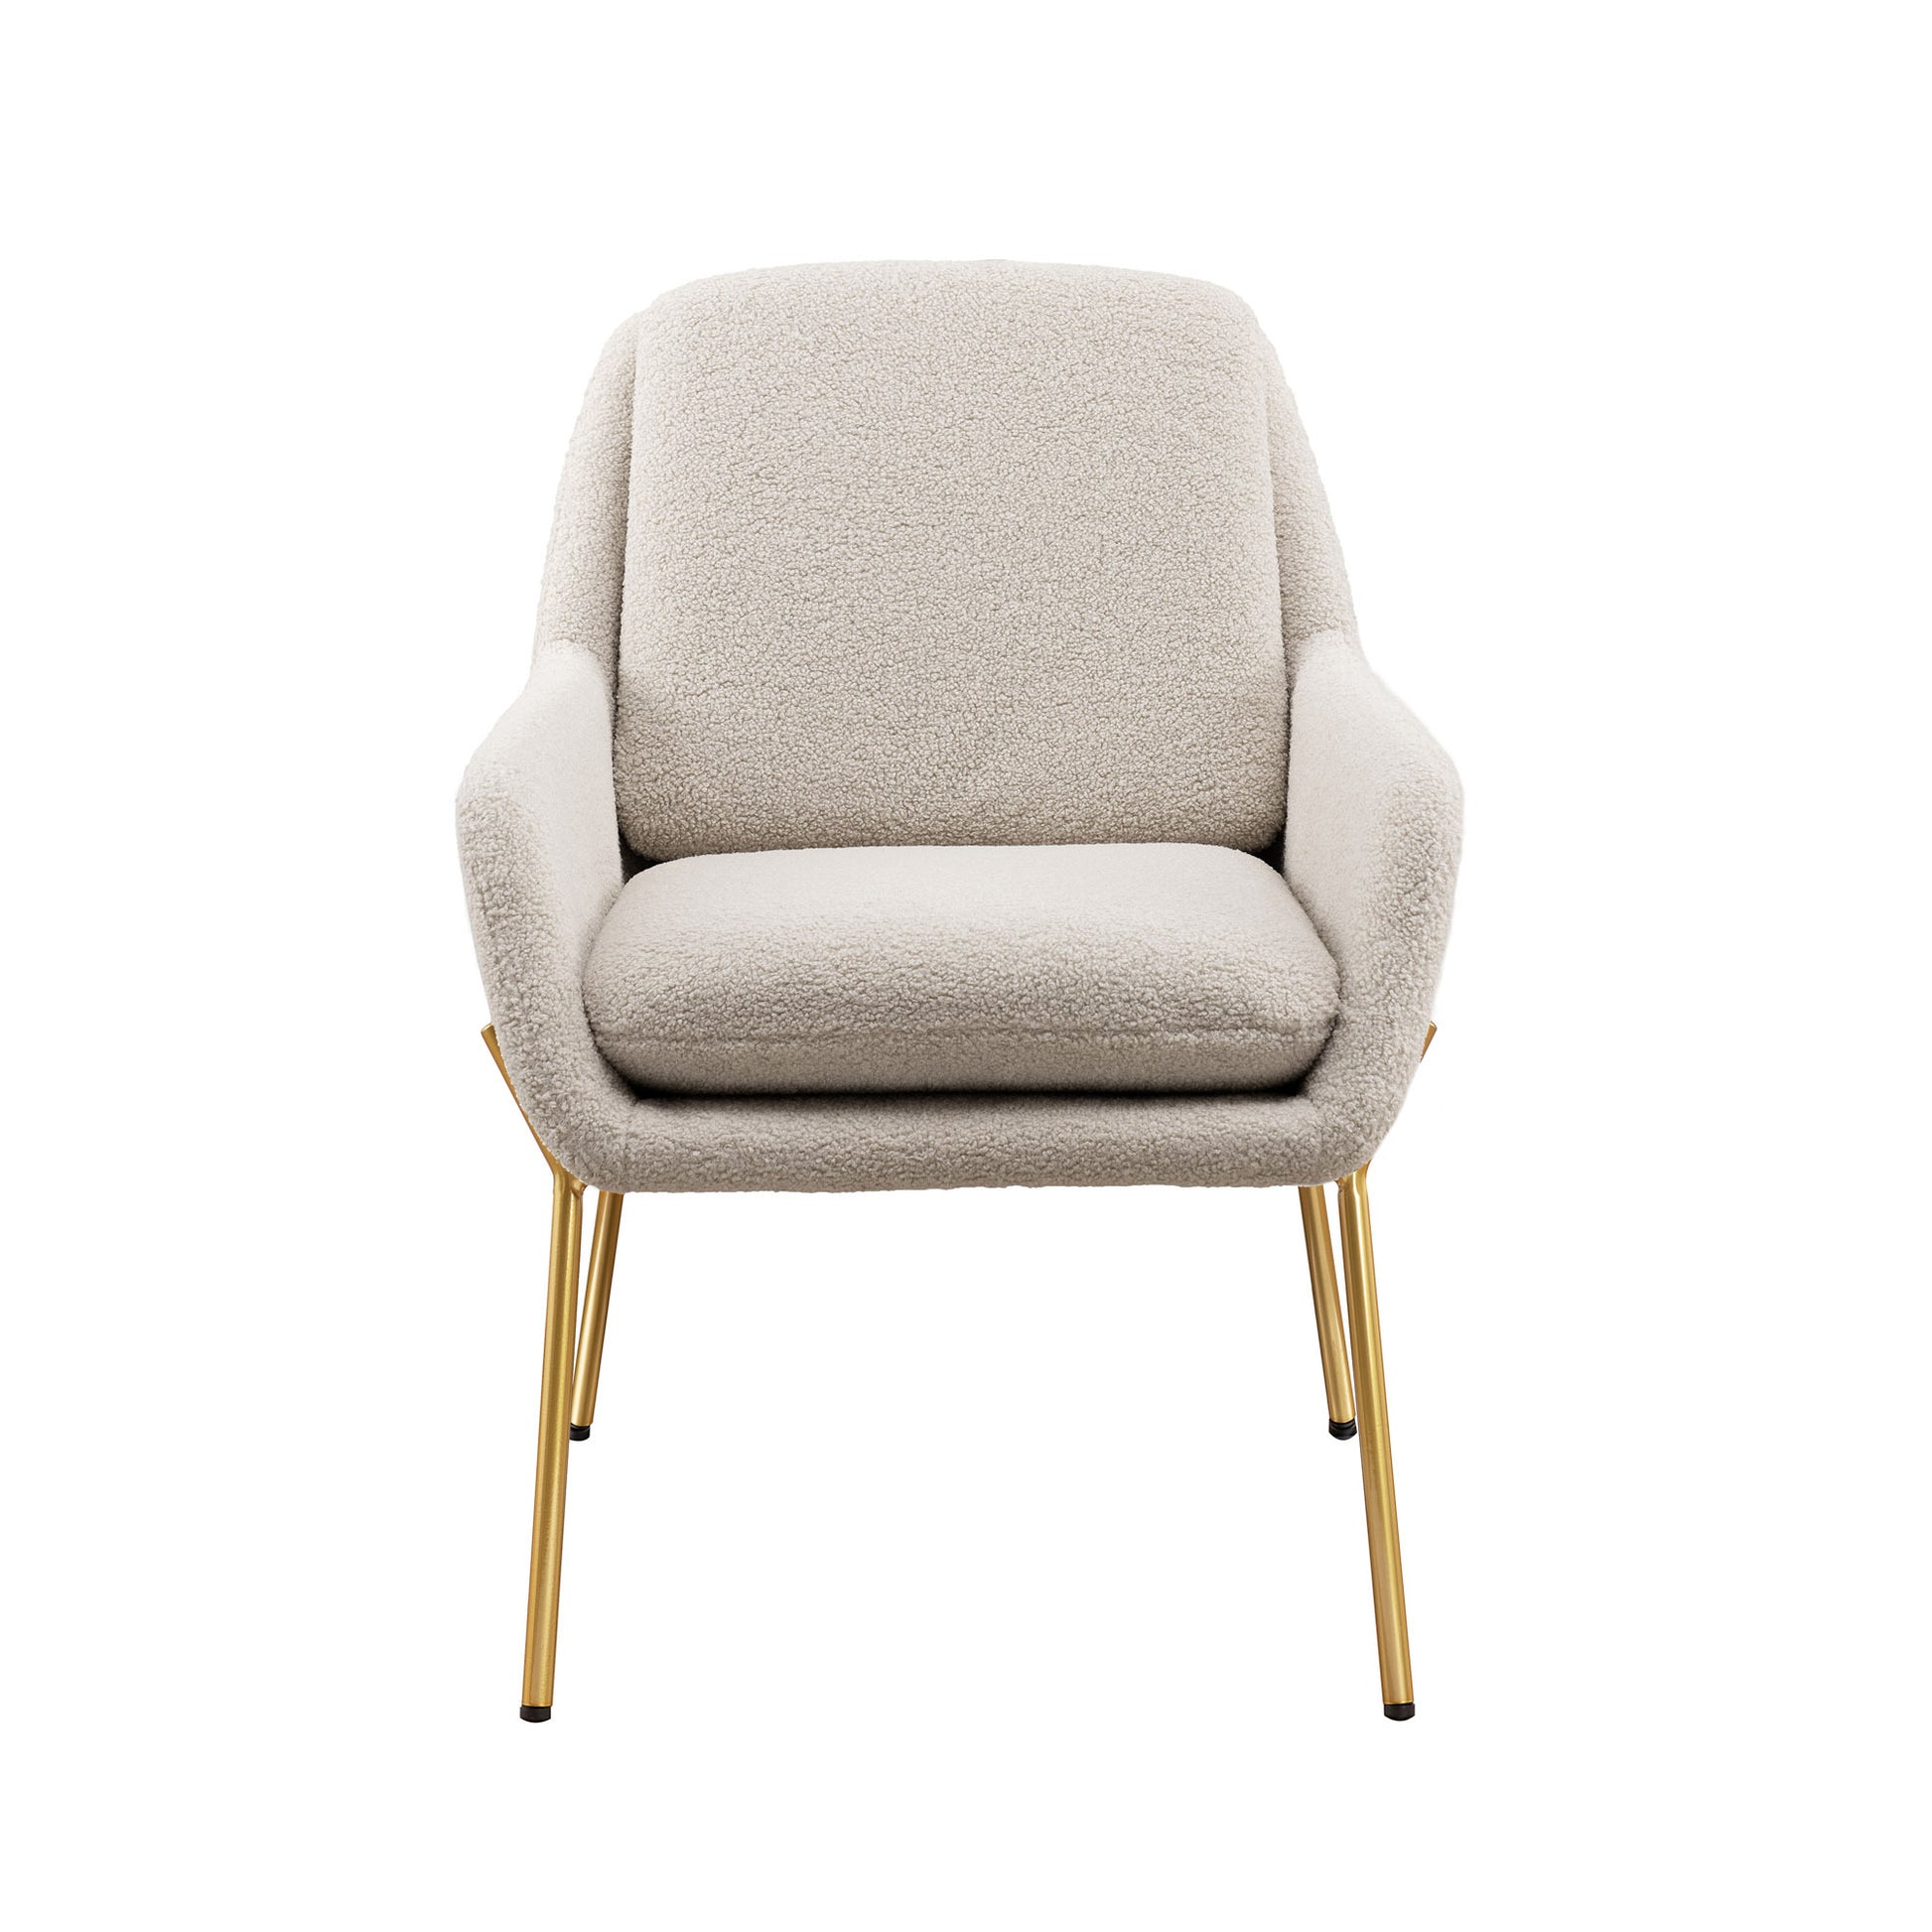 Contemporary Upholstered Boucle Minimalist Accent